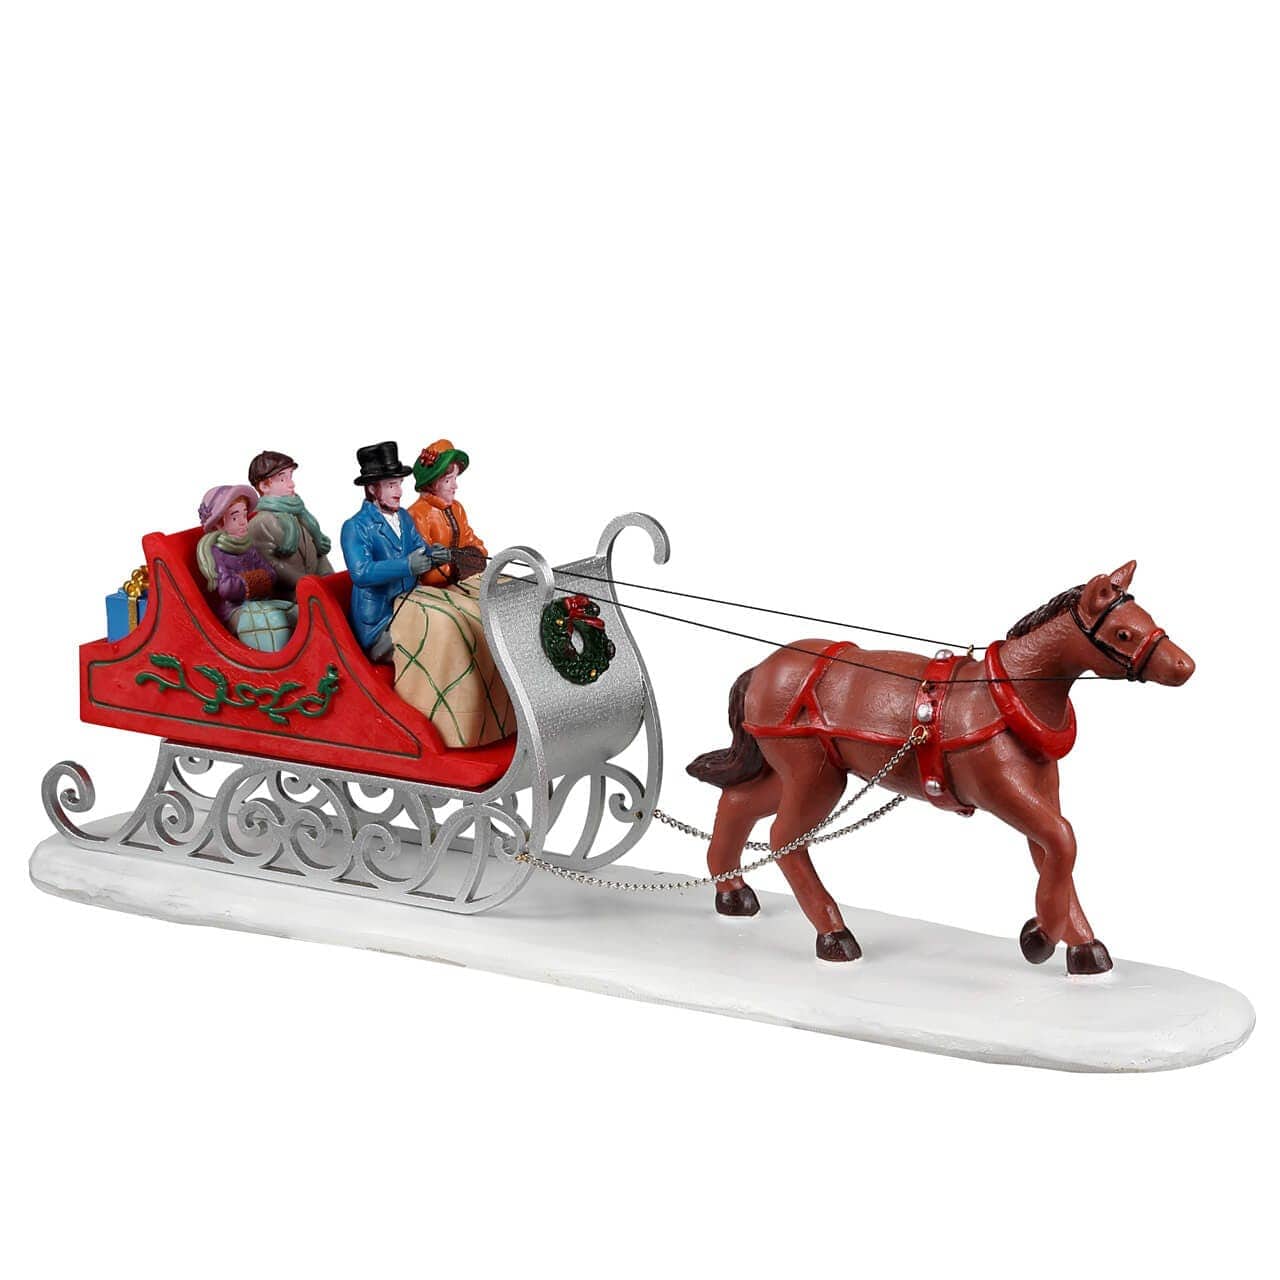 Lemax Table Accents Lemax Table Accents, Victorian Sleigh